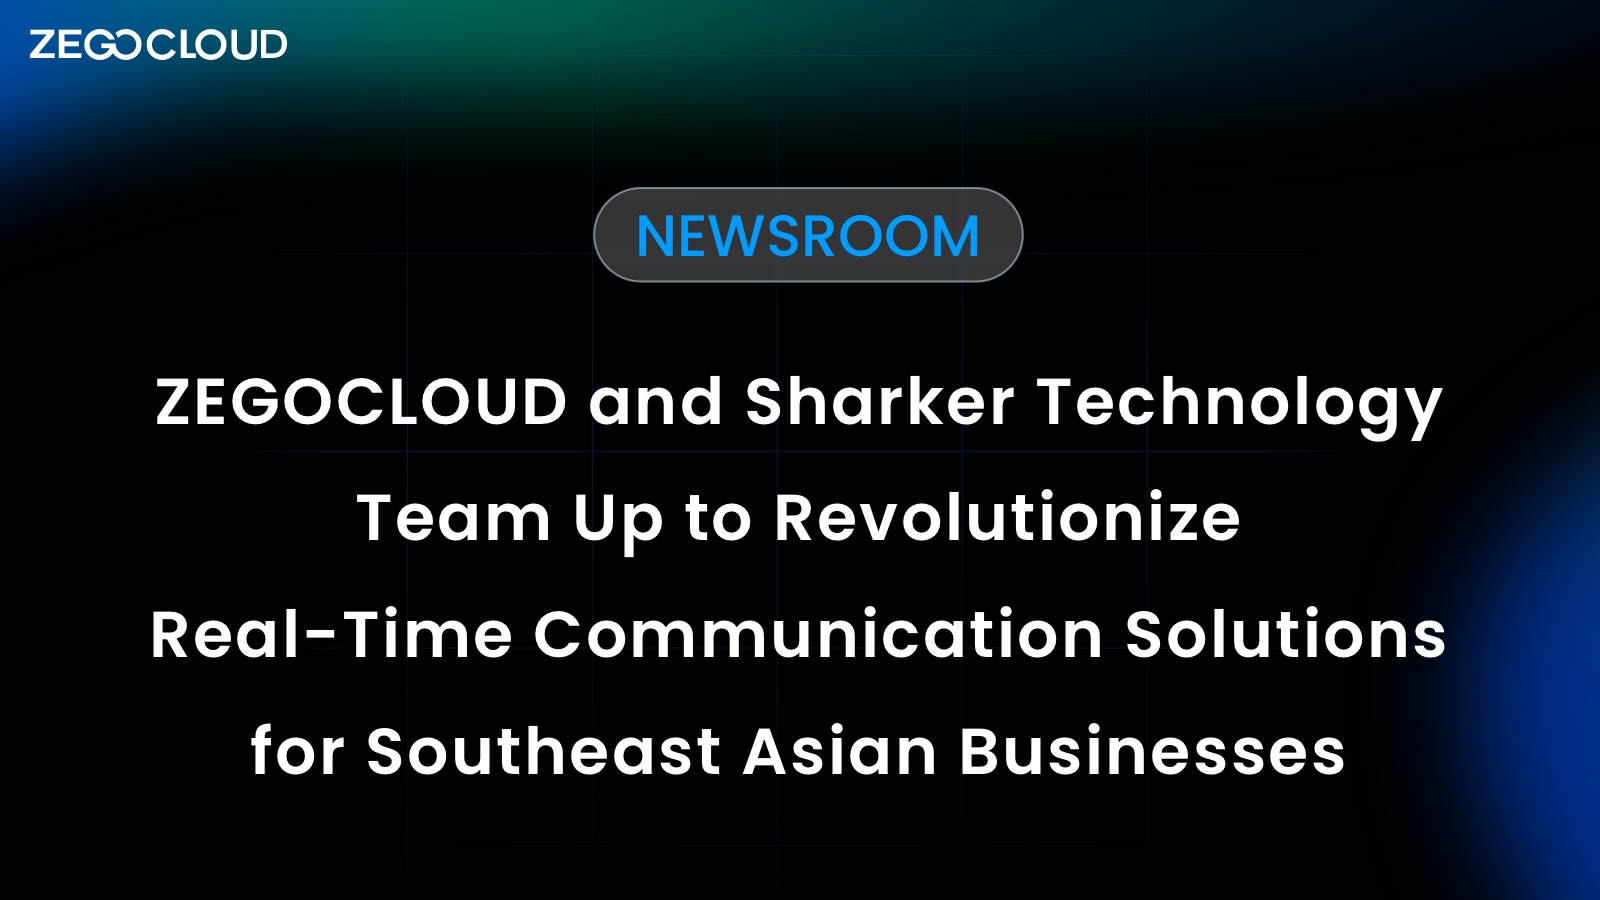 ZEGOCLOUD and Sharker Technology Team Up to Revolutionize Real-Time Communication Solutions for Southeast Asian Businesses